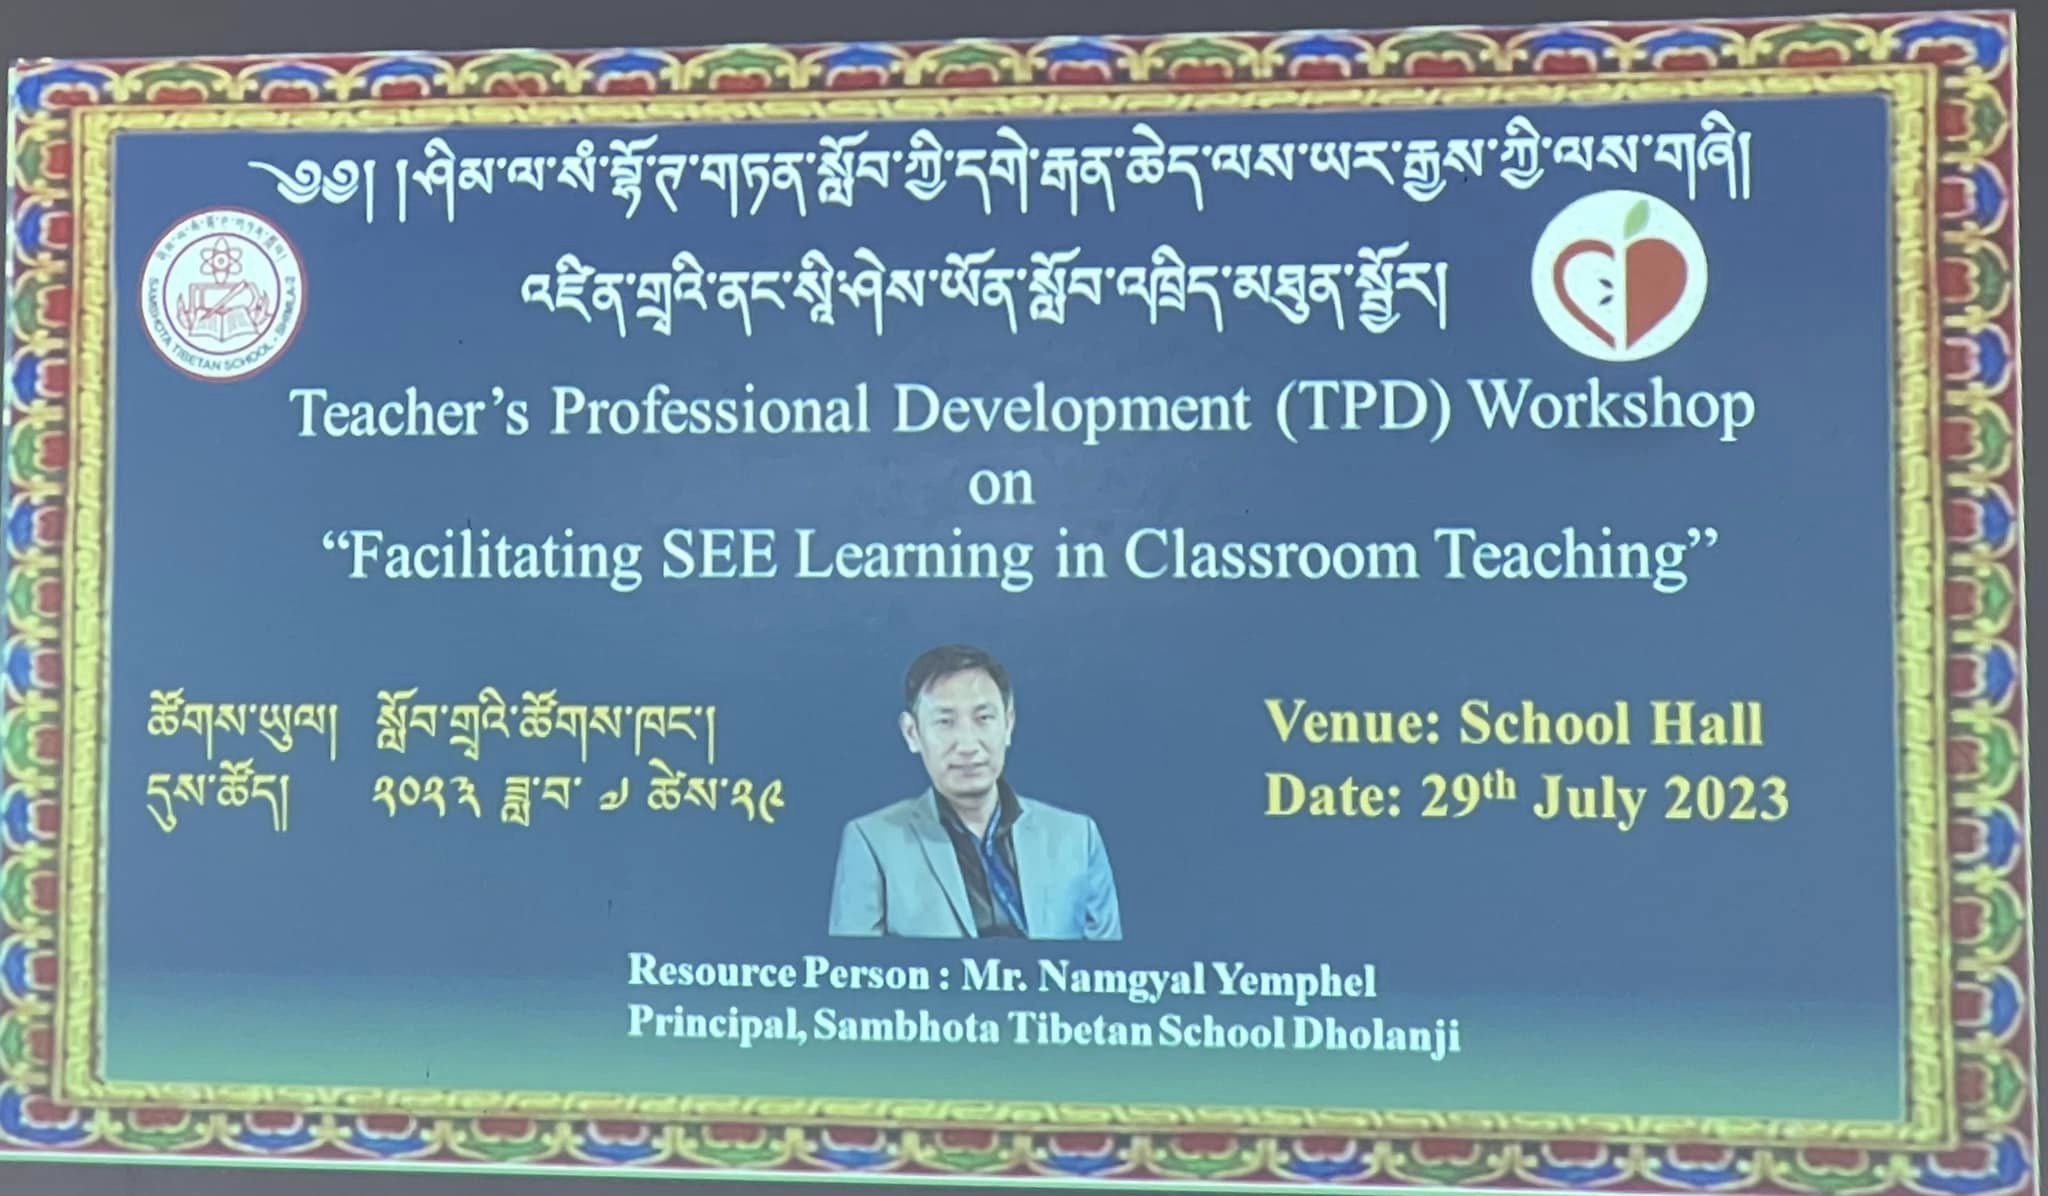 One-day workshop on Facilitating SEE Learning in Classroom Teaching 